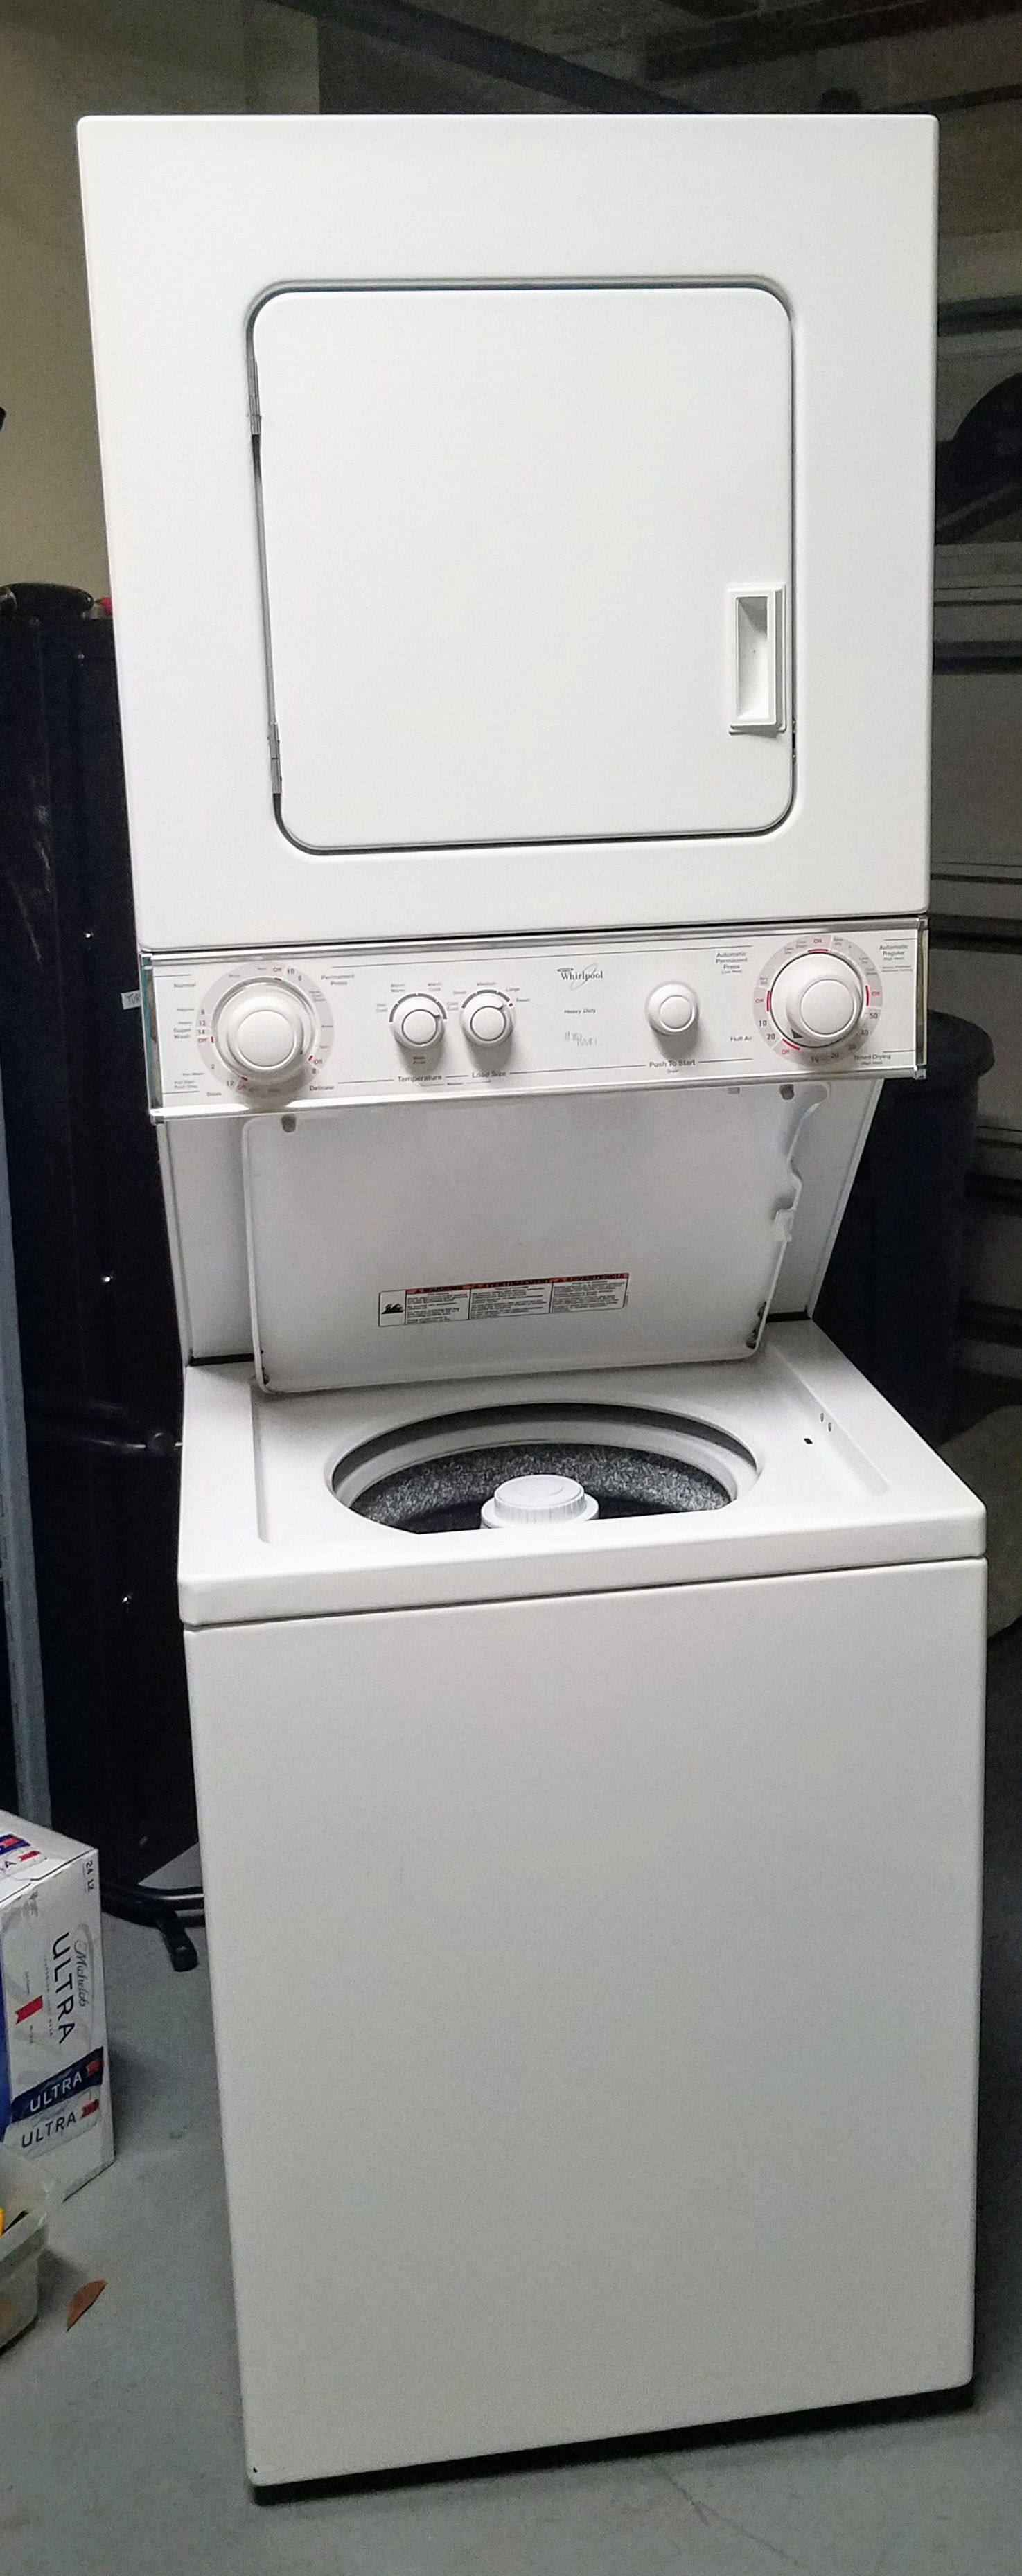 Whirlpool Stacked Washer and Dryer